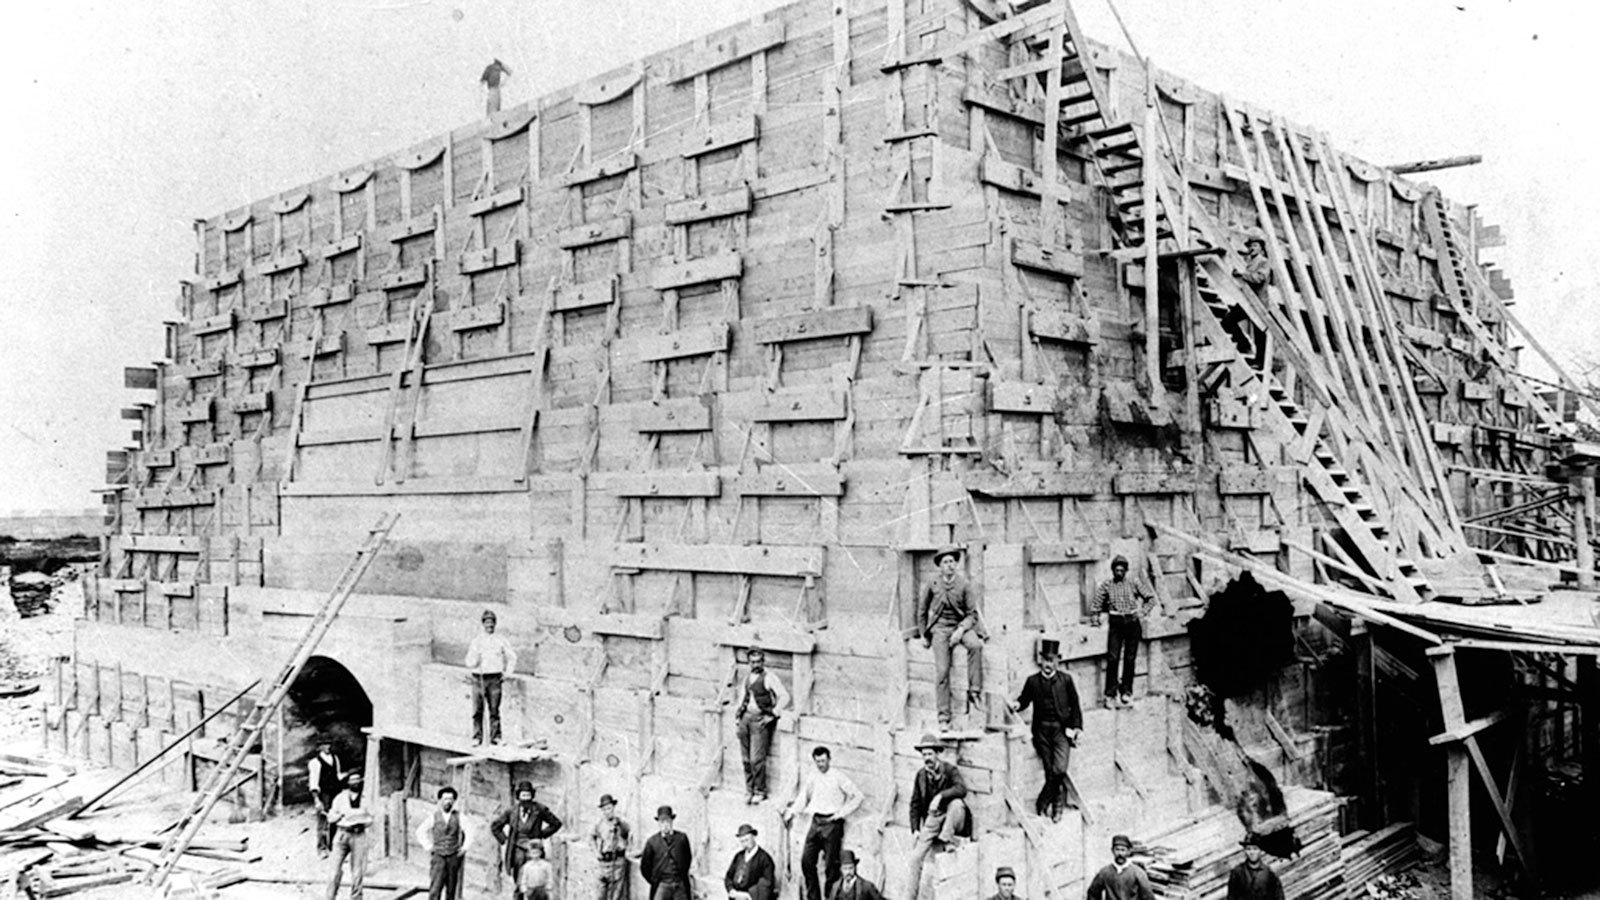 pedestal for the Statue of Liberty under construction